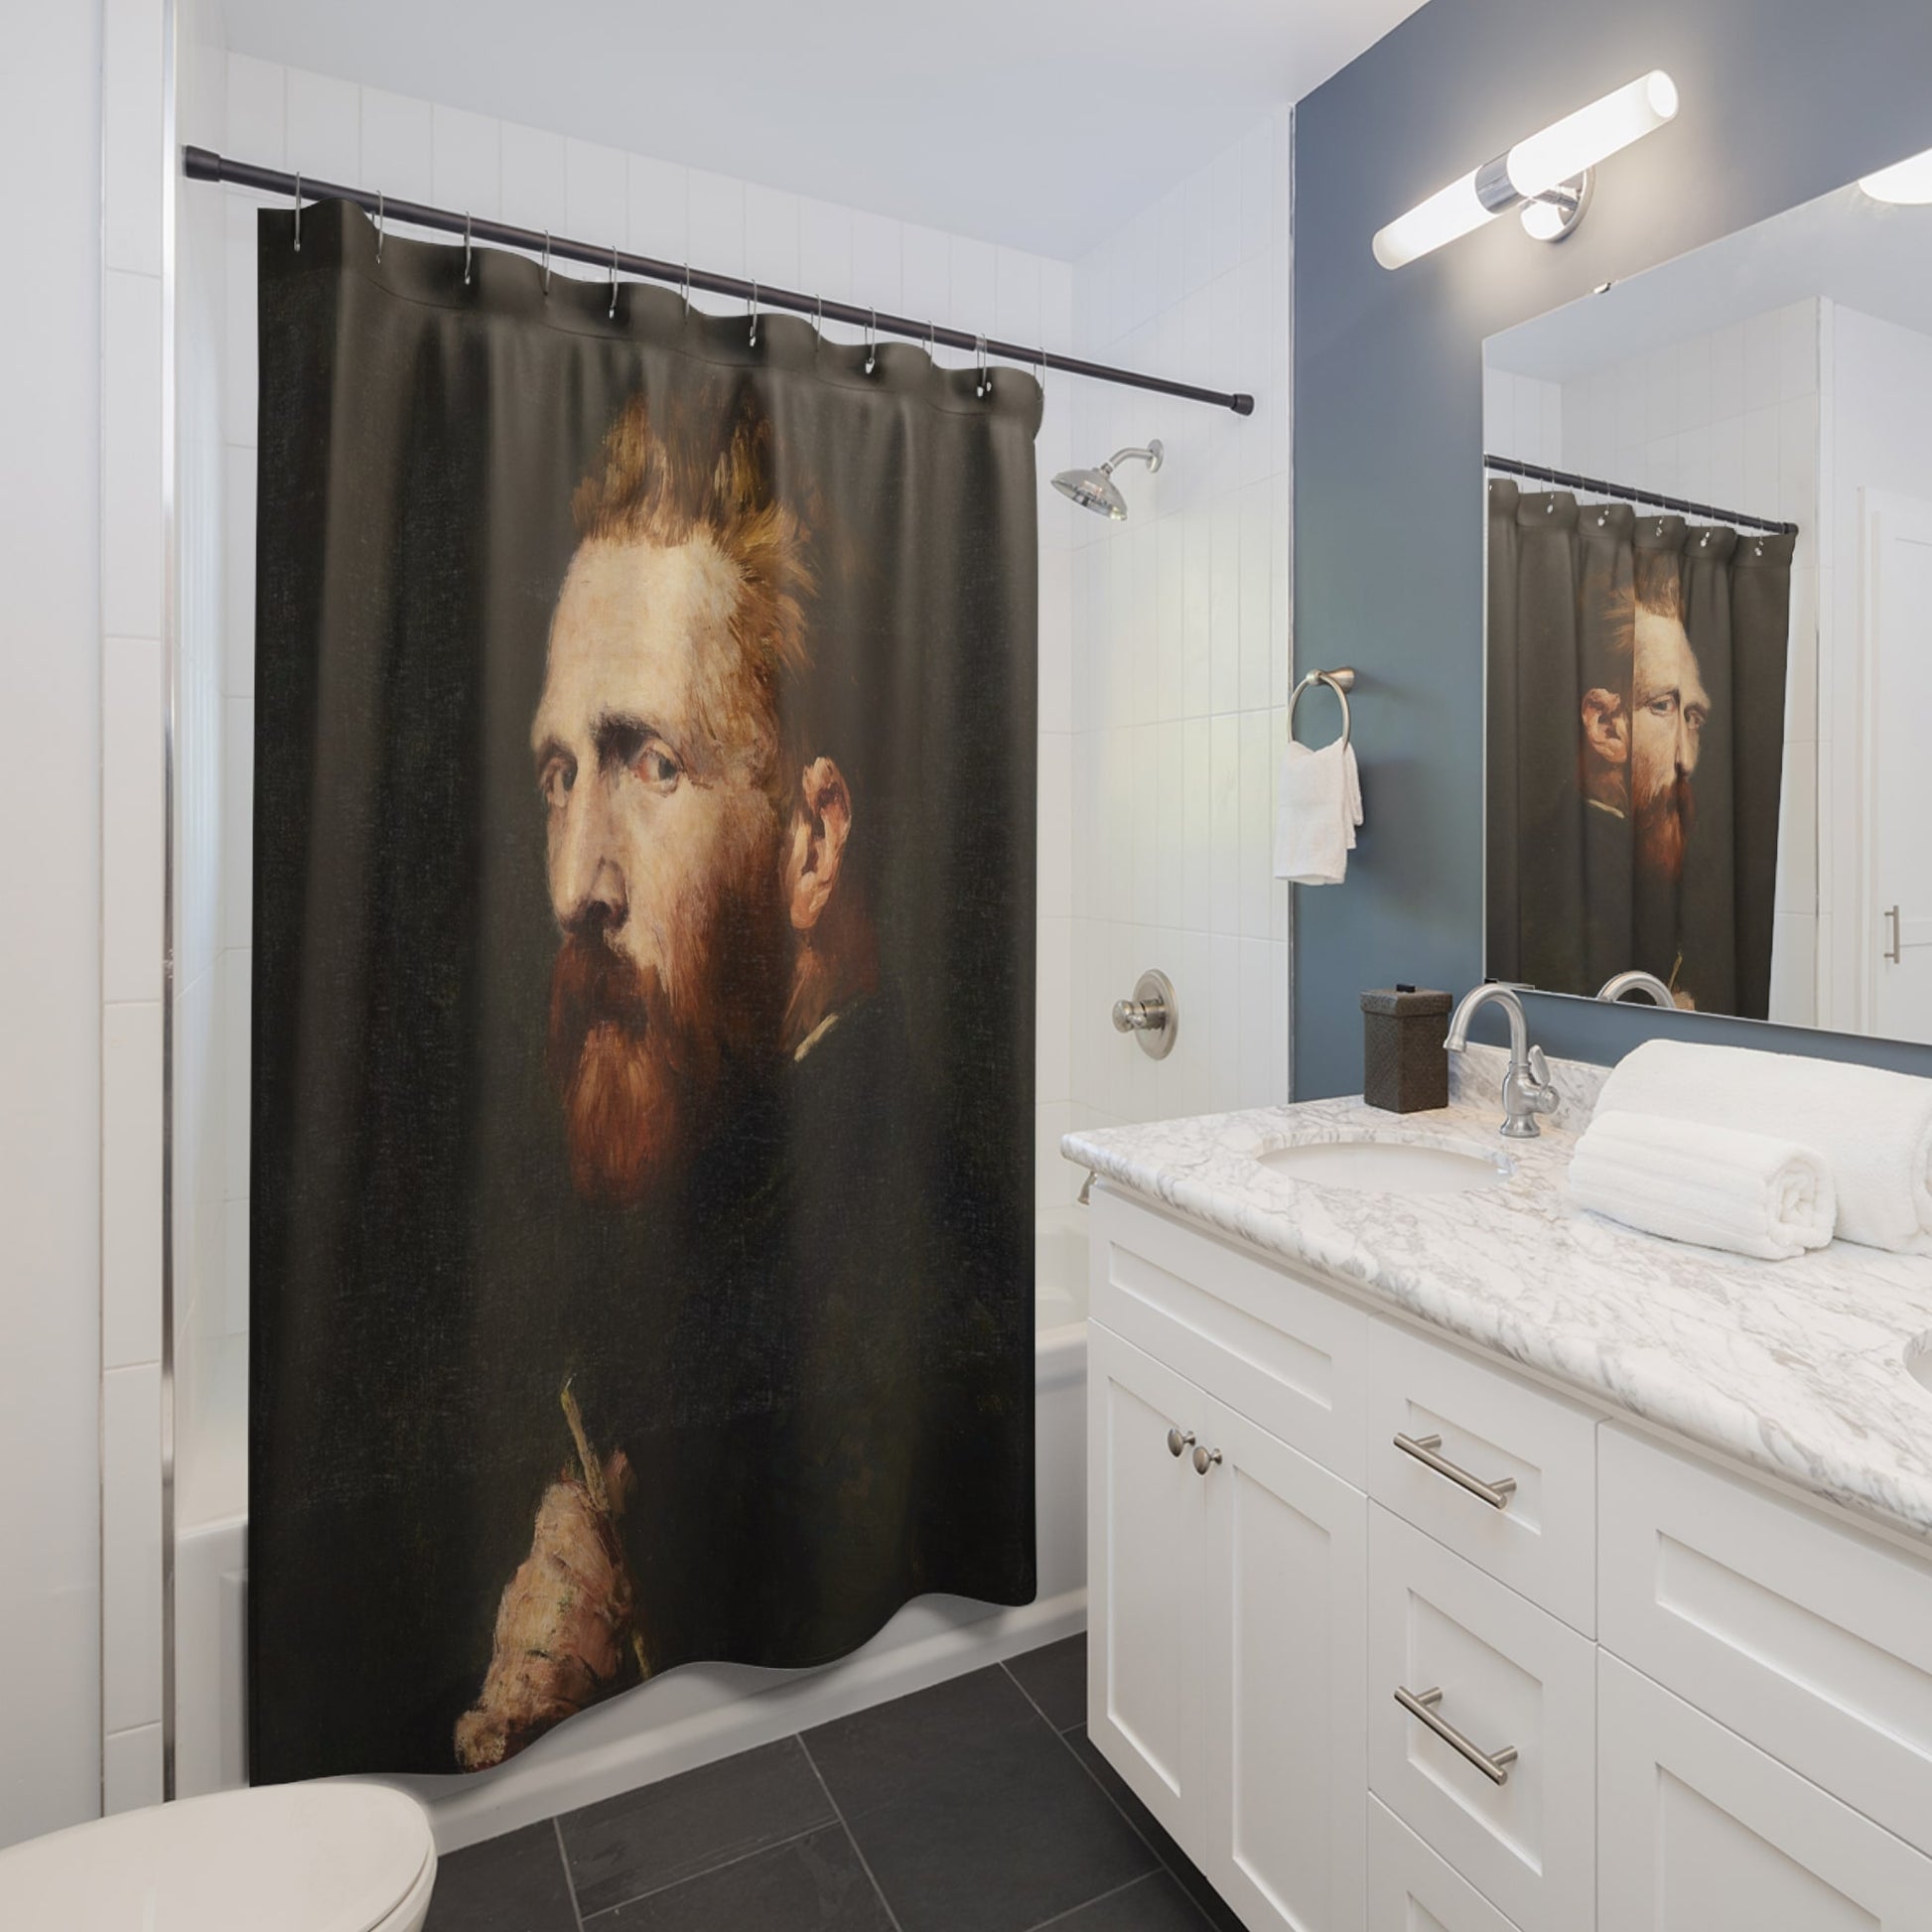 The Painter Shower Curtain Best Bathroom Decorating Ideas for Victorian Decor